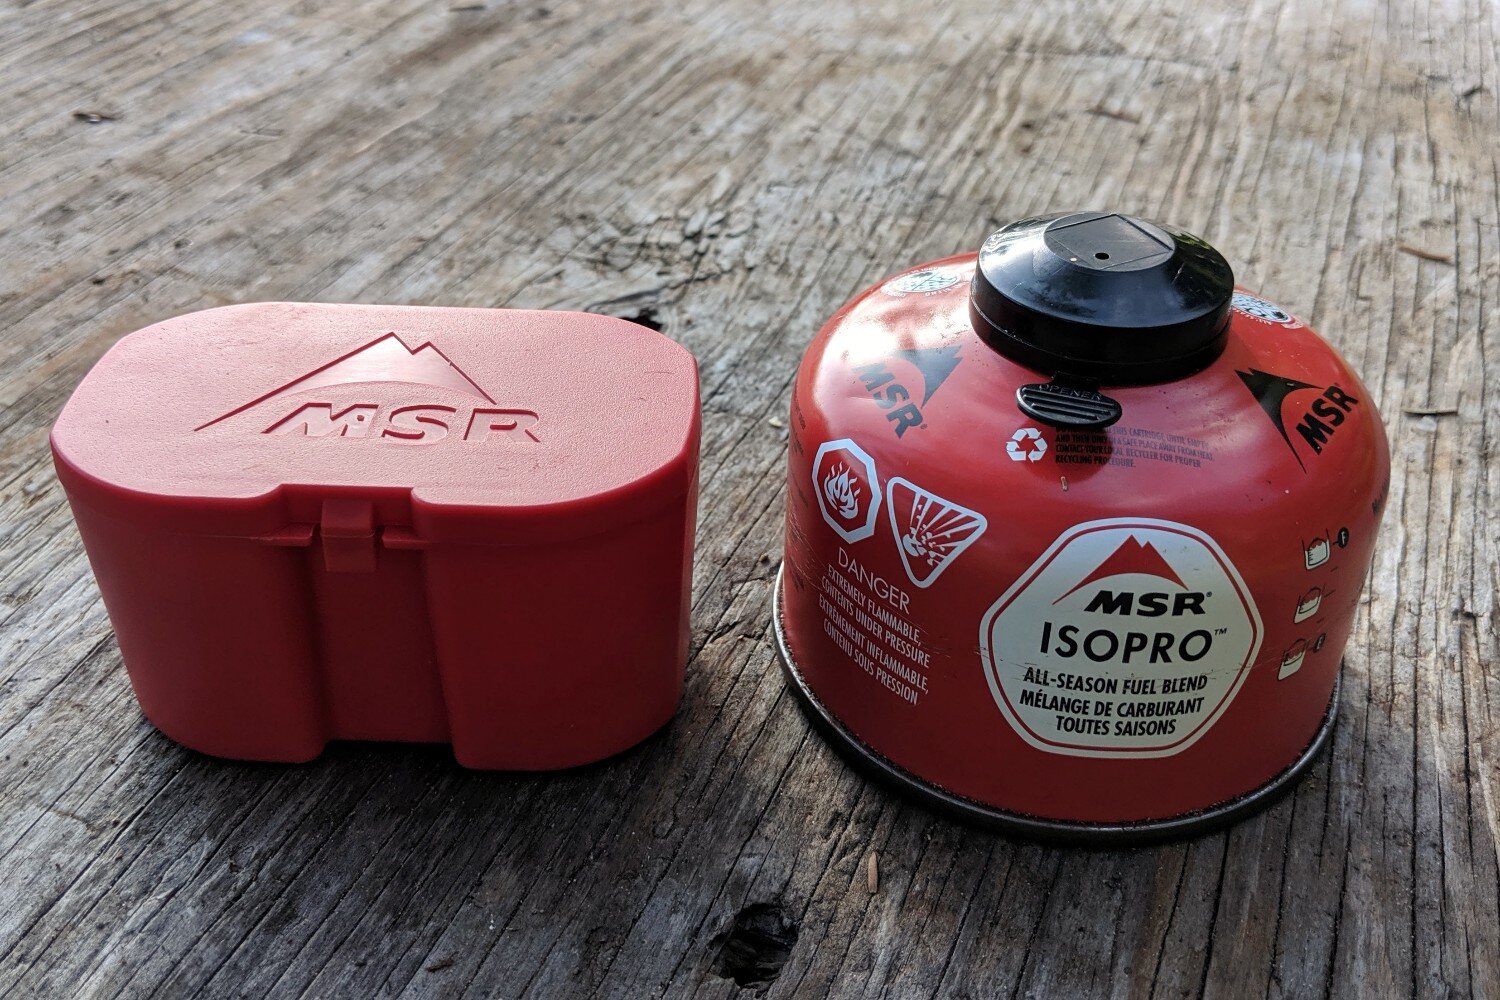 Comparing the size of the Pocket Rocket 2 carrying case with a 110g isobutane fuel canister.